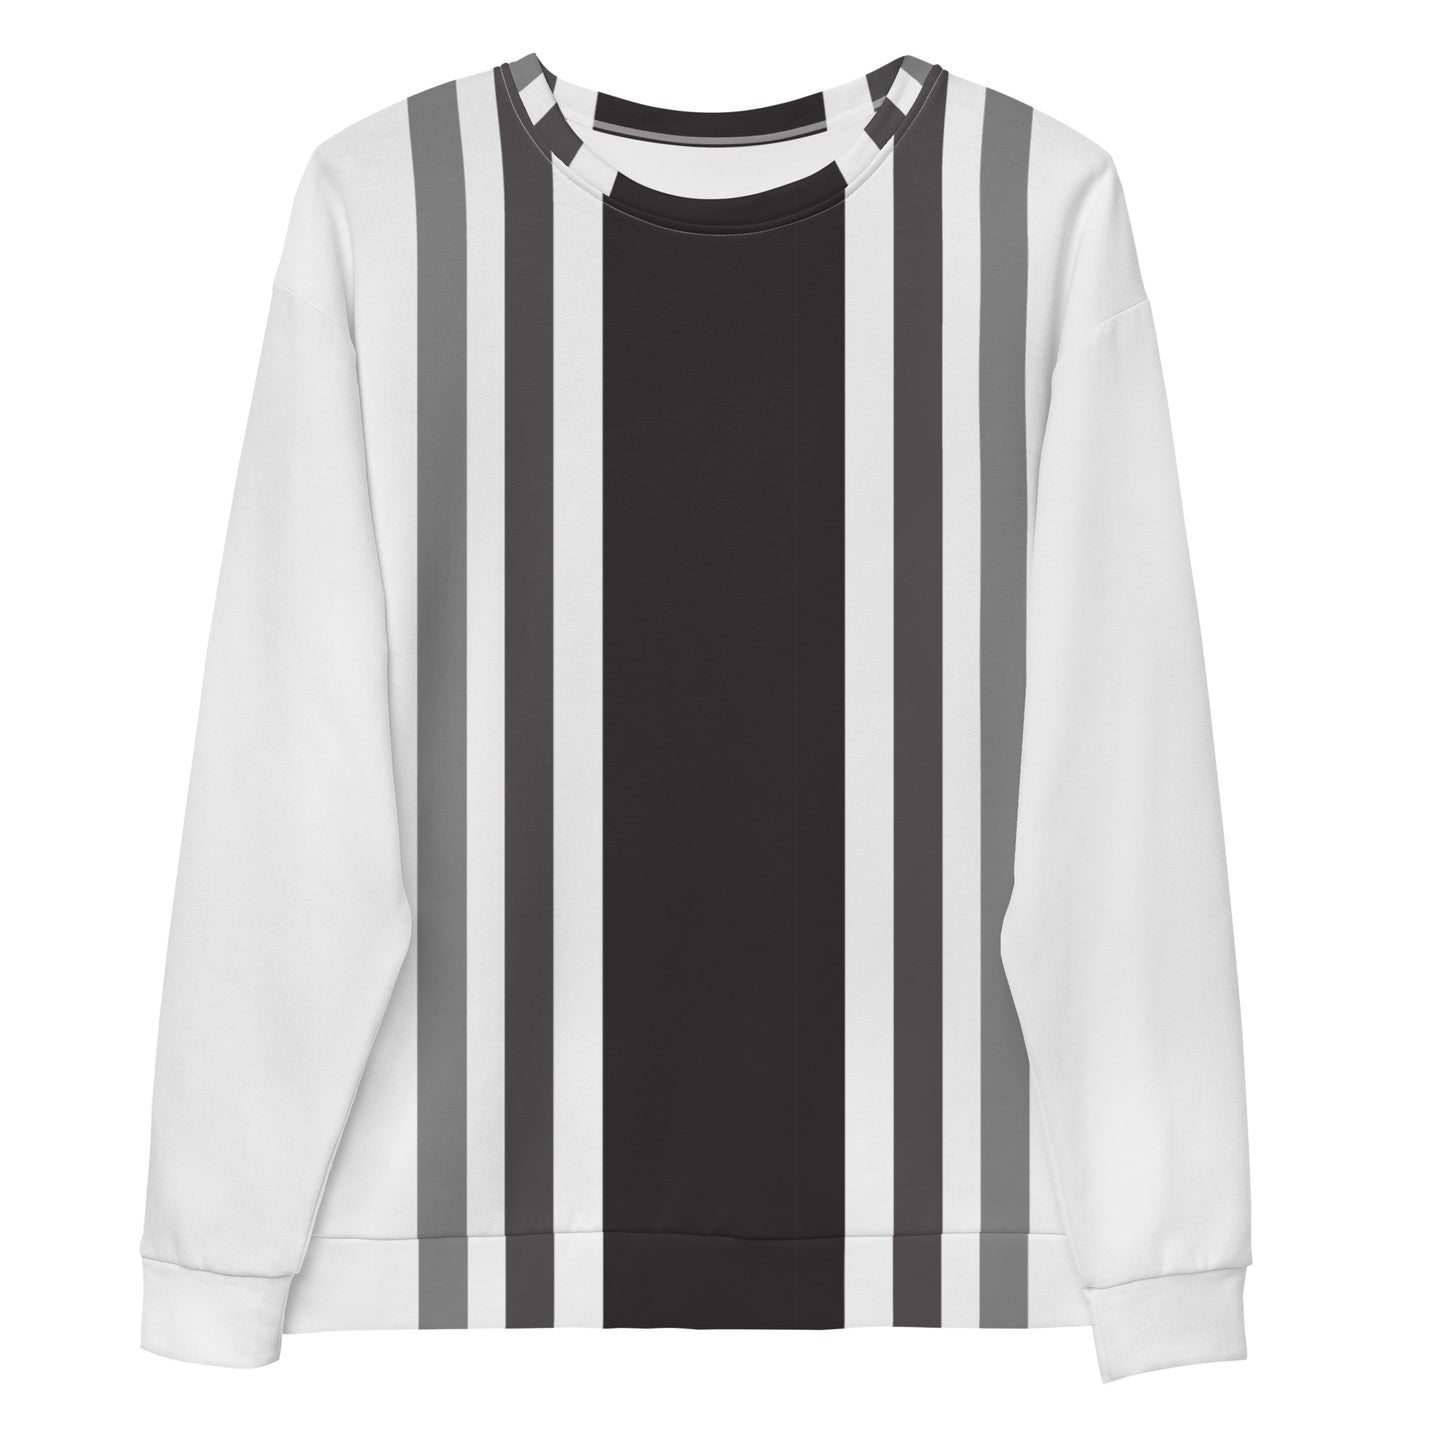 Vertical Lines Charcoal - Sustainably Made Sweatshirt